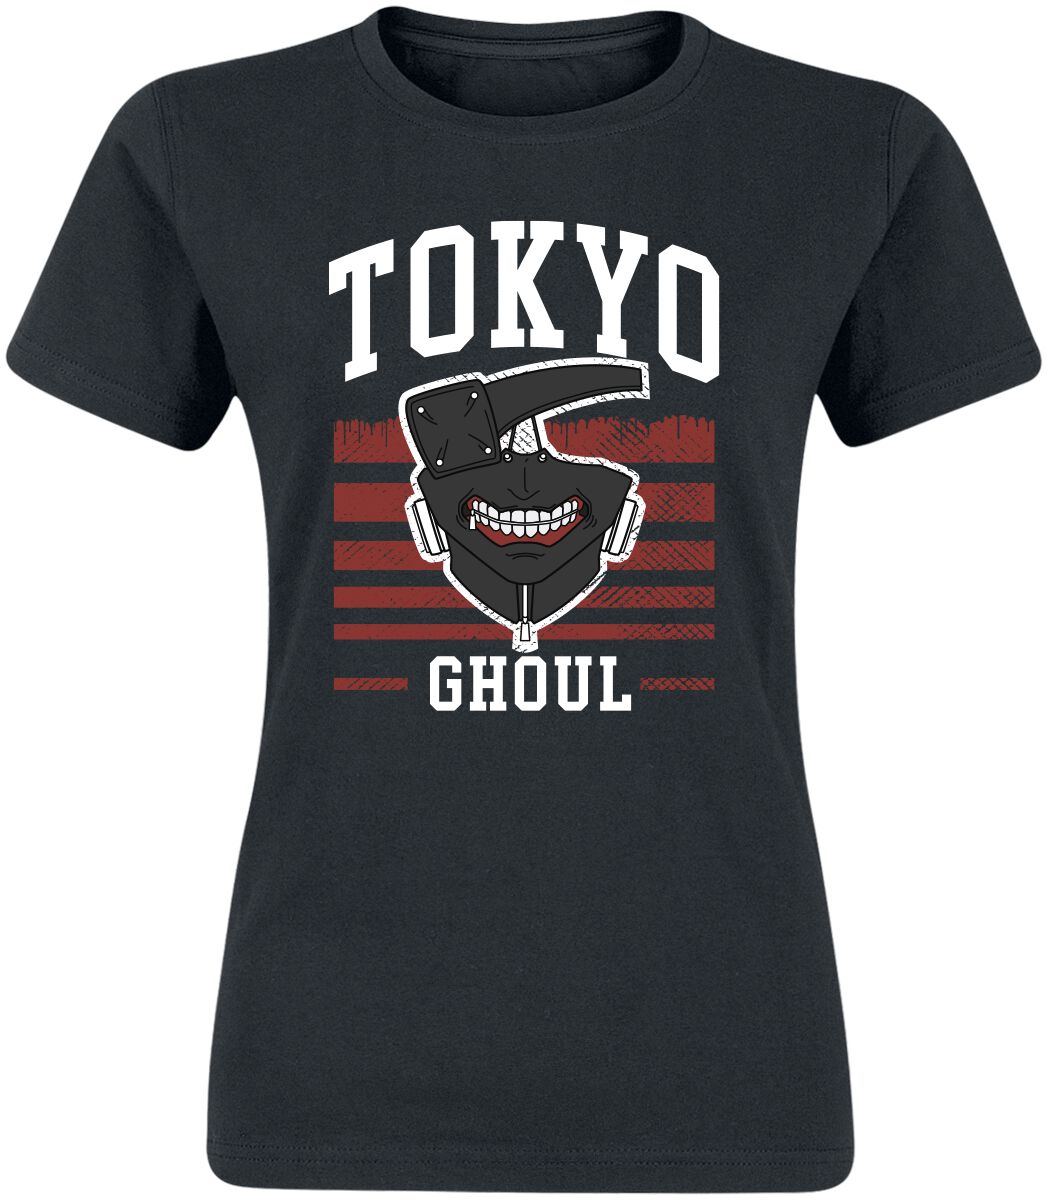 Image of T-Shirt Anime di Tokyo Ghoul - College Dropout - S a XXL - Donna - nero